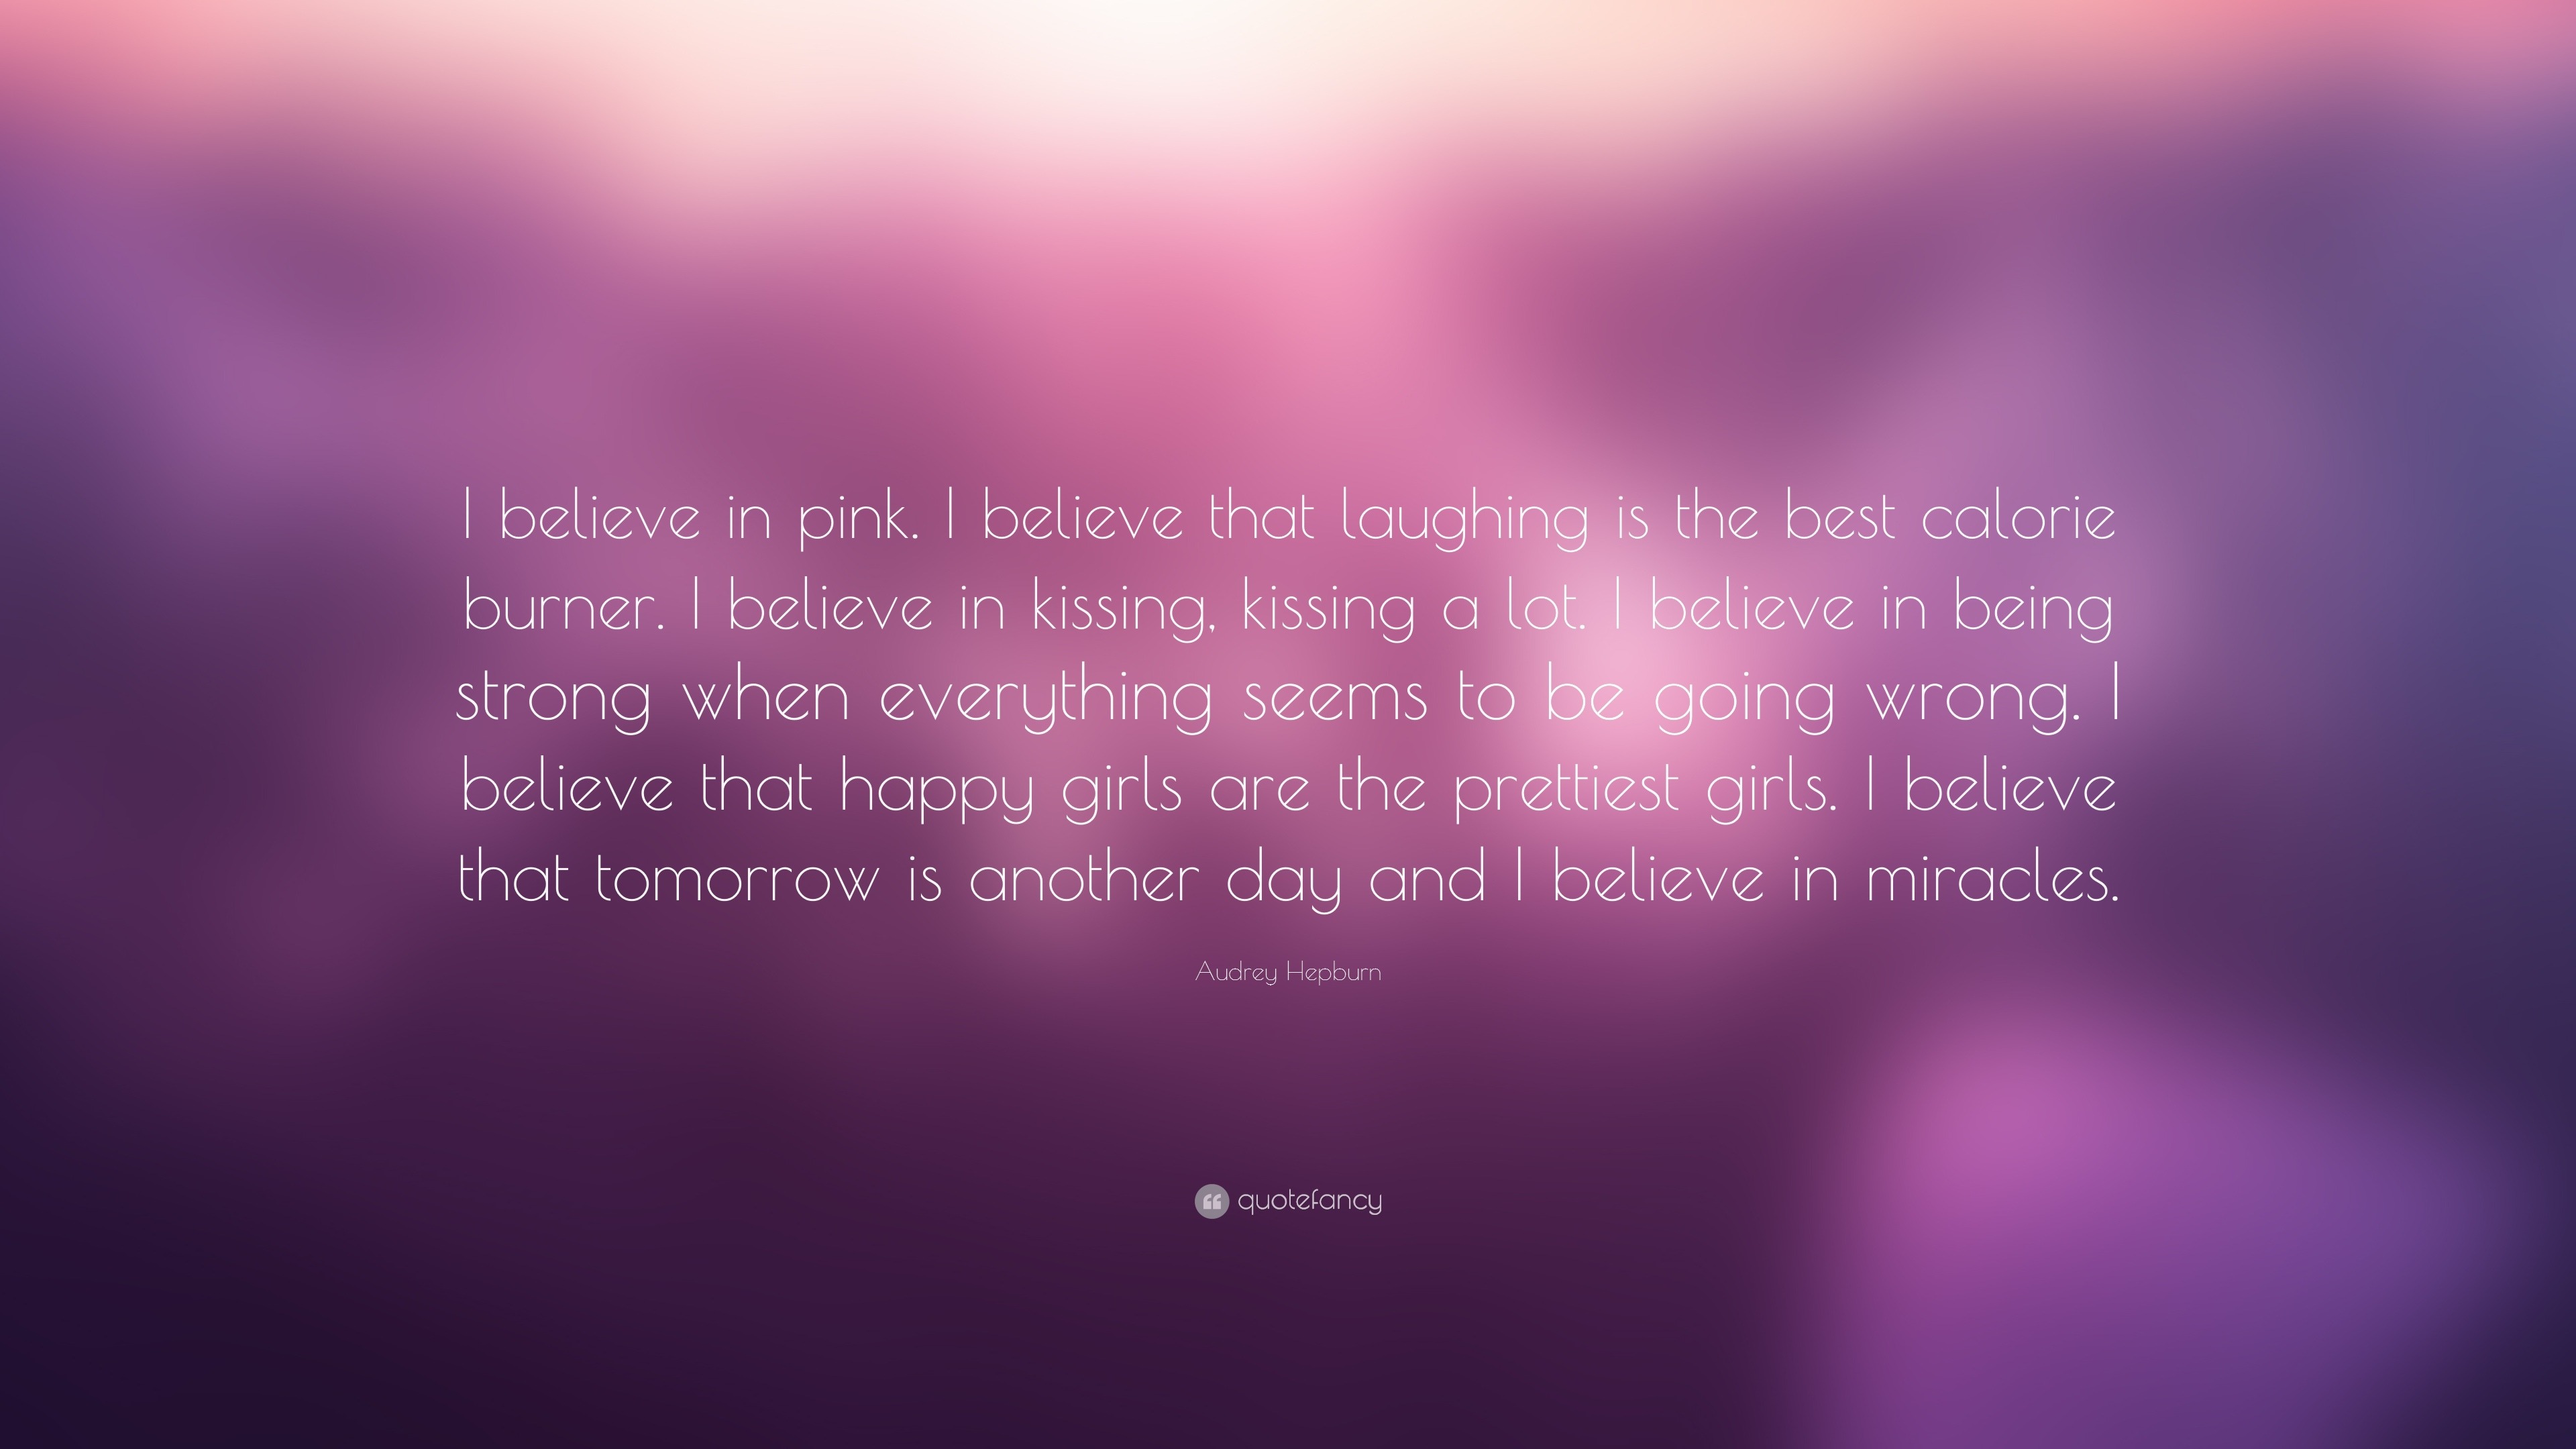 4046-Audrey-Hepburn-Quote-I-believe-in-pink-I-believe-that-laughing-is.jpg